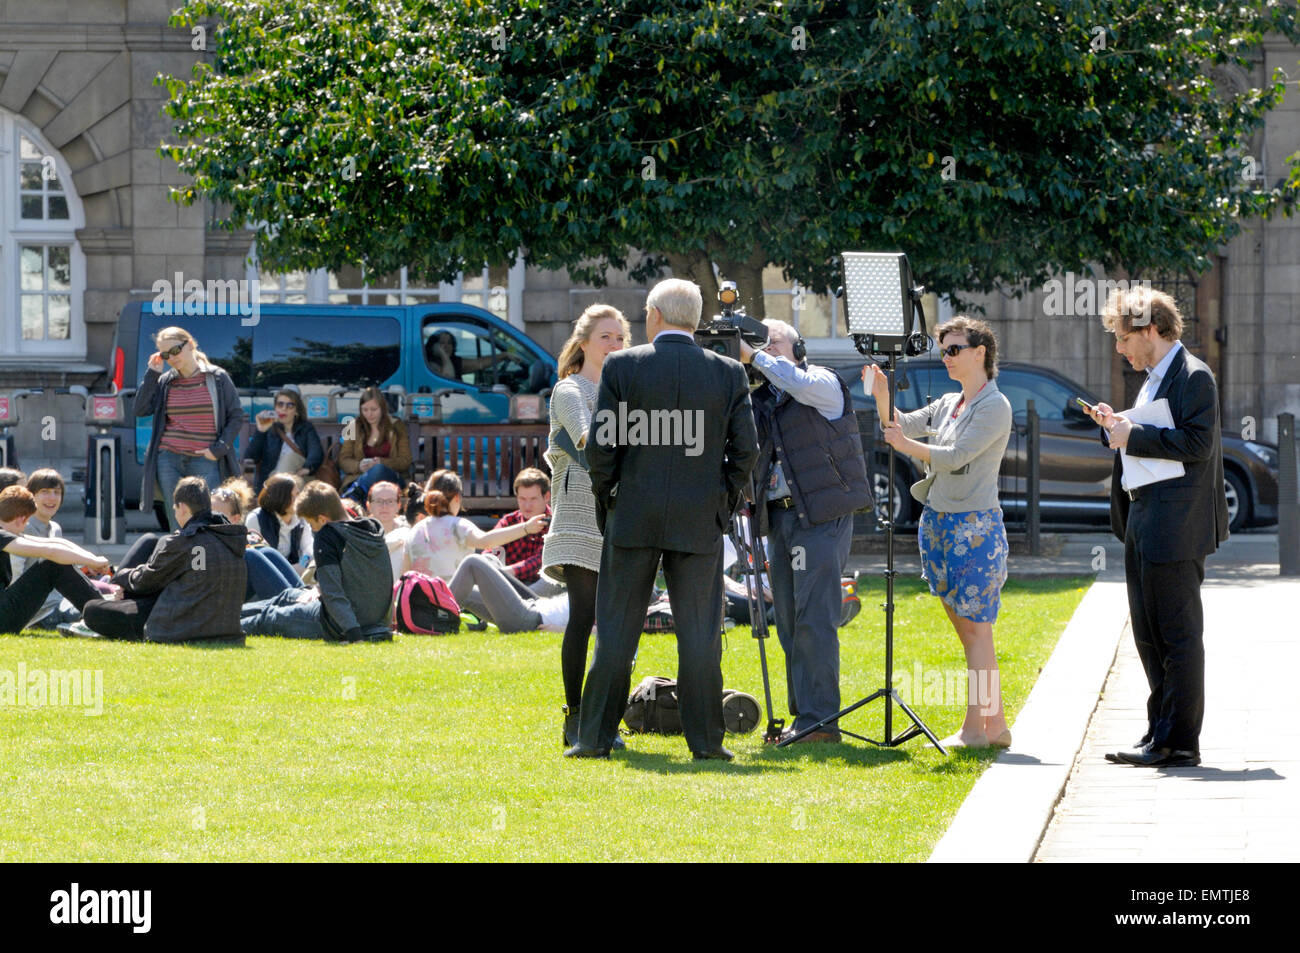 London, England, UK. TV crew interviewing a politician (Paddy Ashdown) on College Green, Westminster Stock Photo